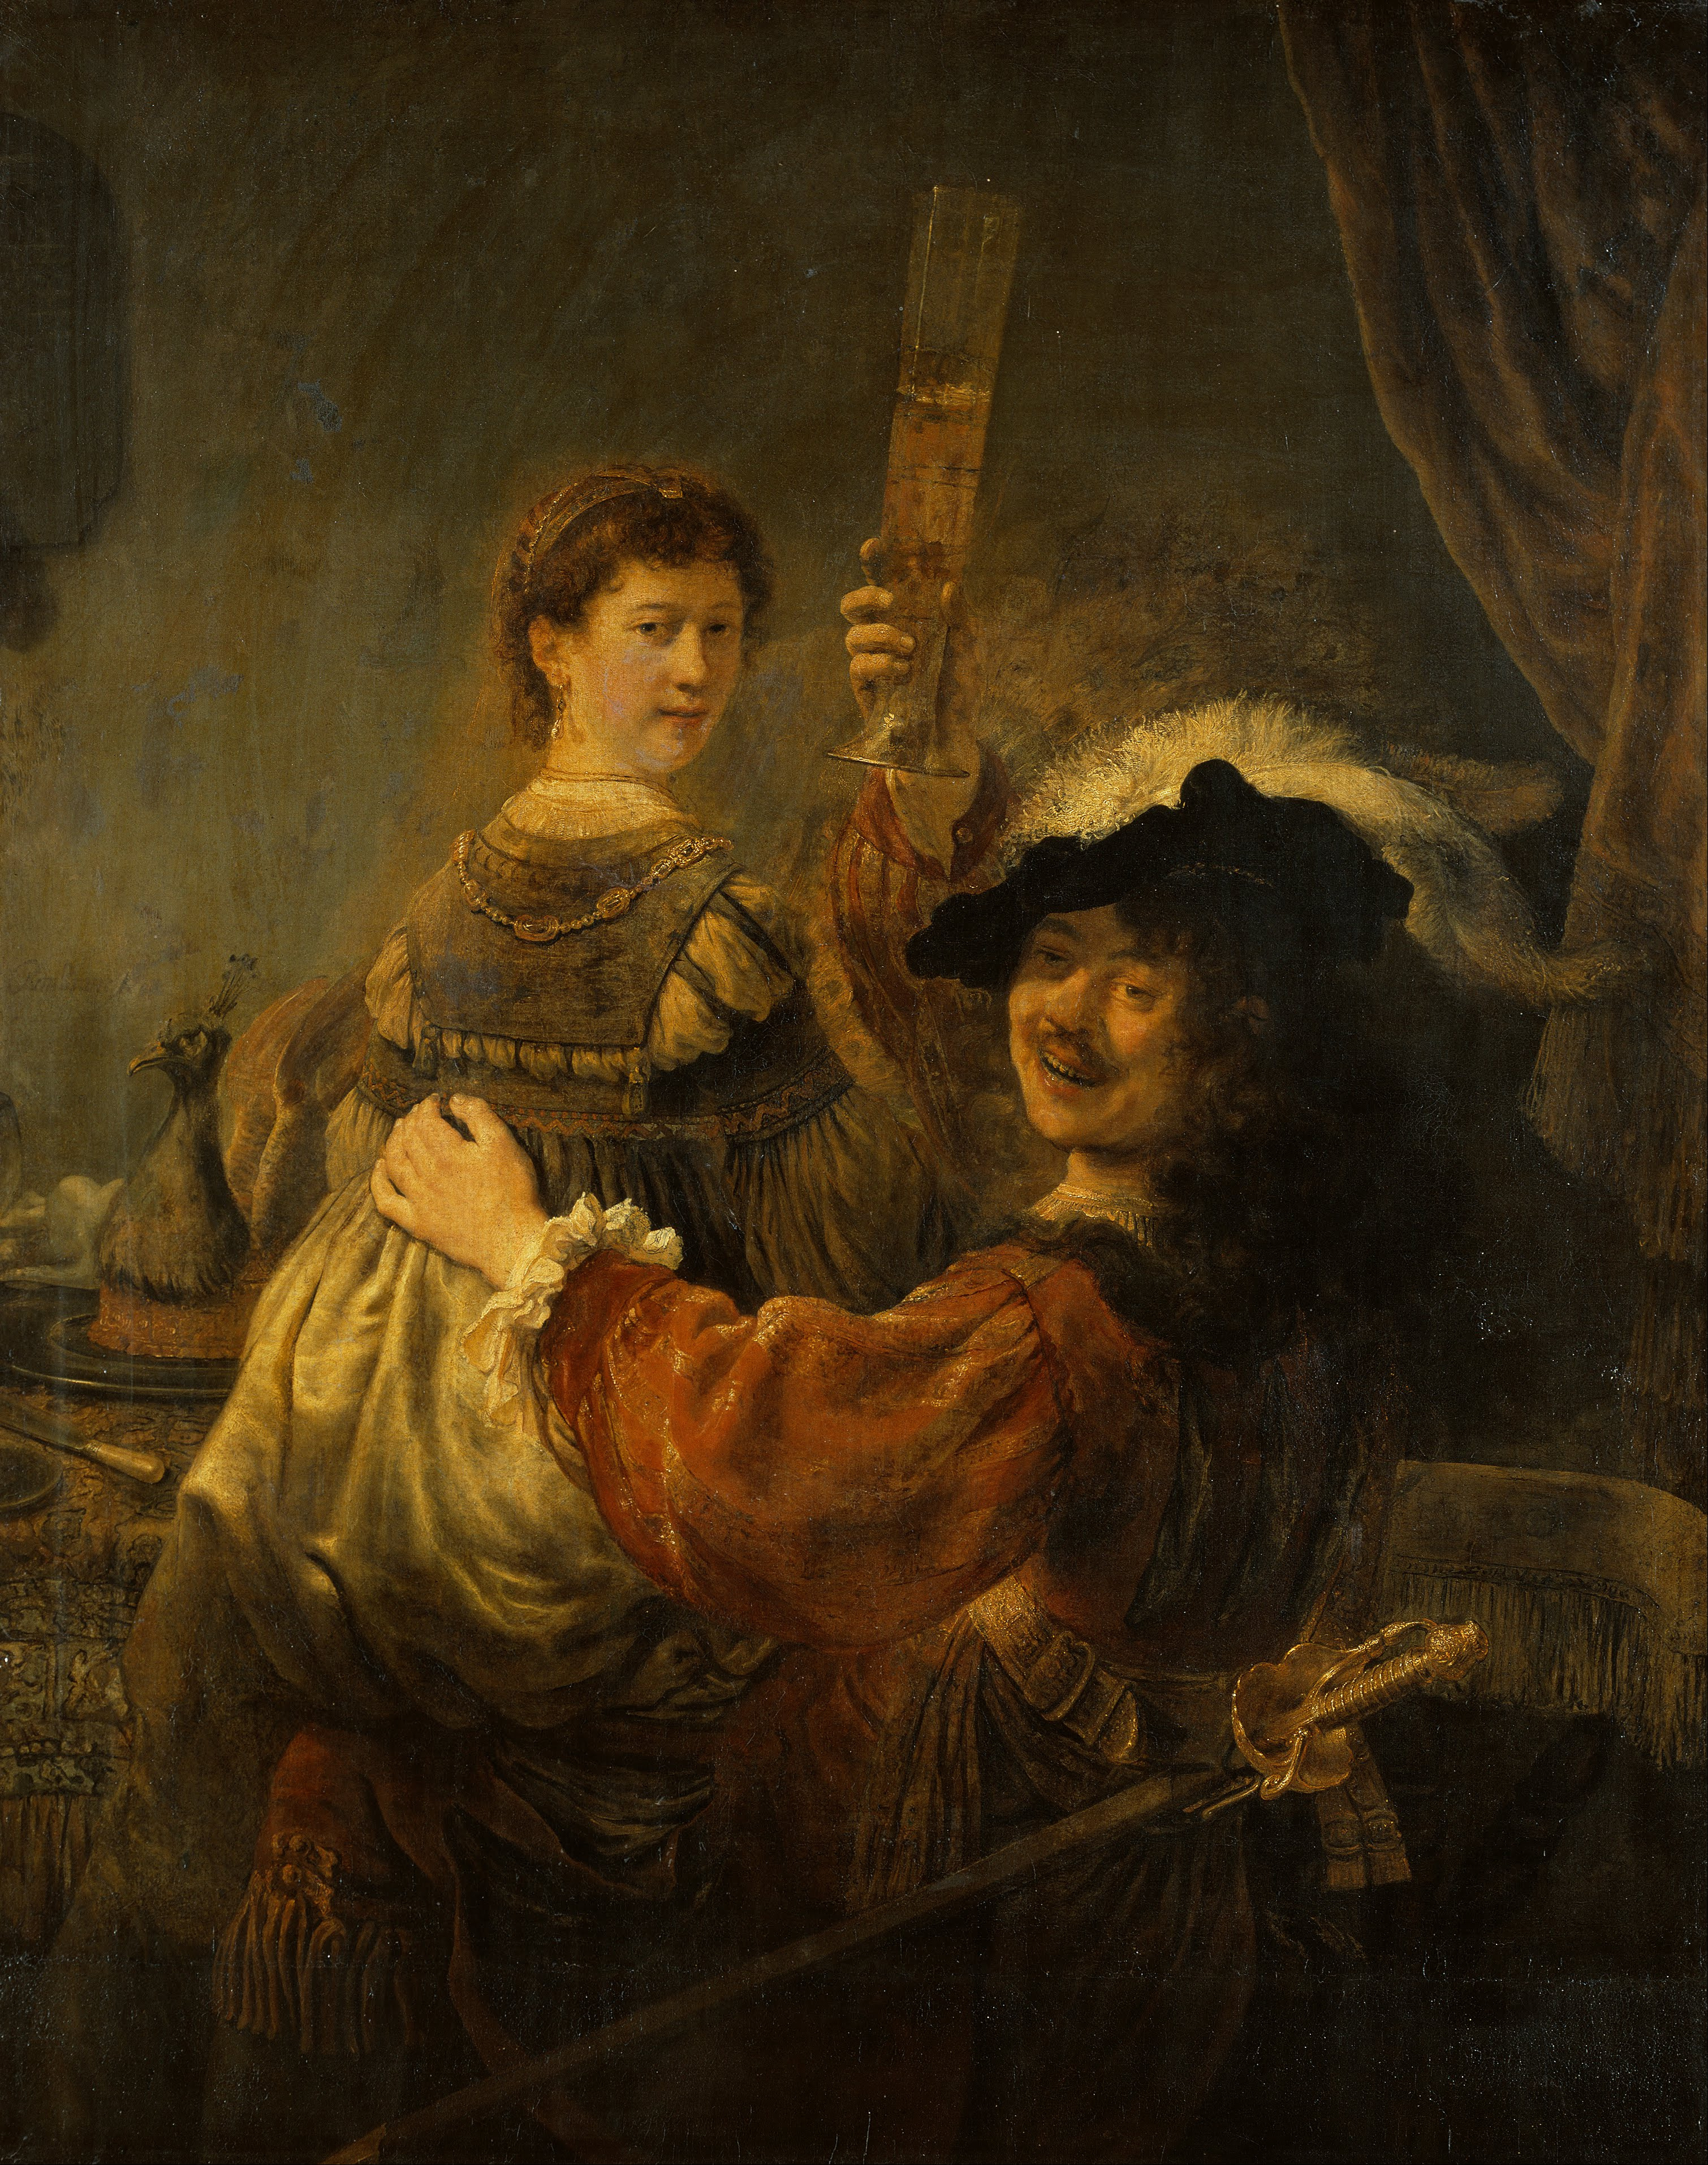 Rembrandt_-_Rembrandt_and_Saskia_in_the_Scene_of_the_Prodigal_Son_-_Google_Art_Project